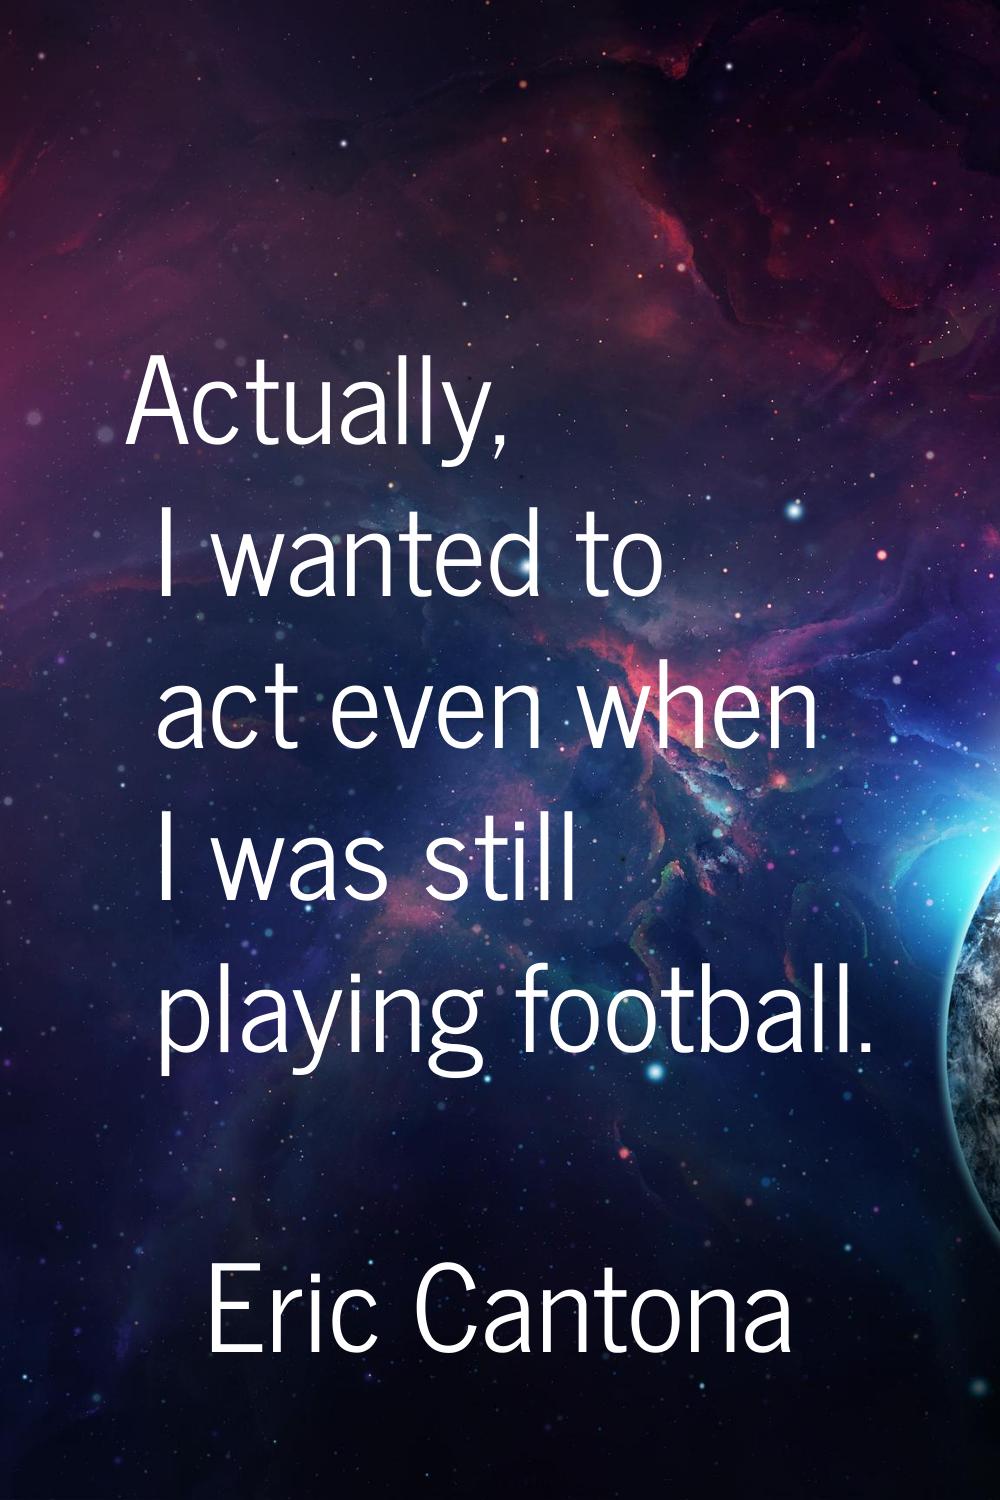 Actually, I wanted to act even when I was still playing football.